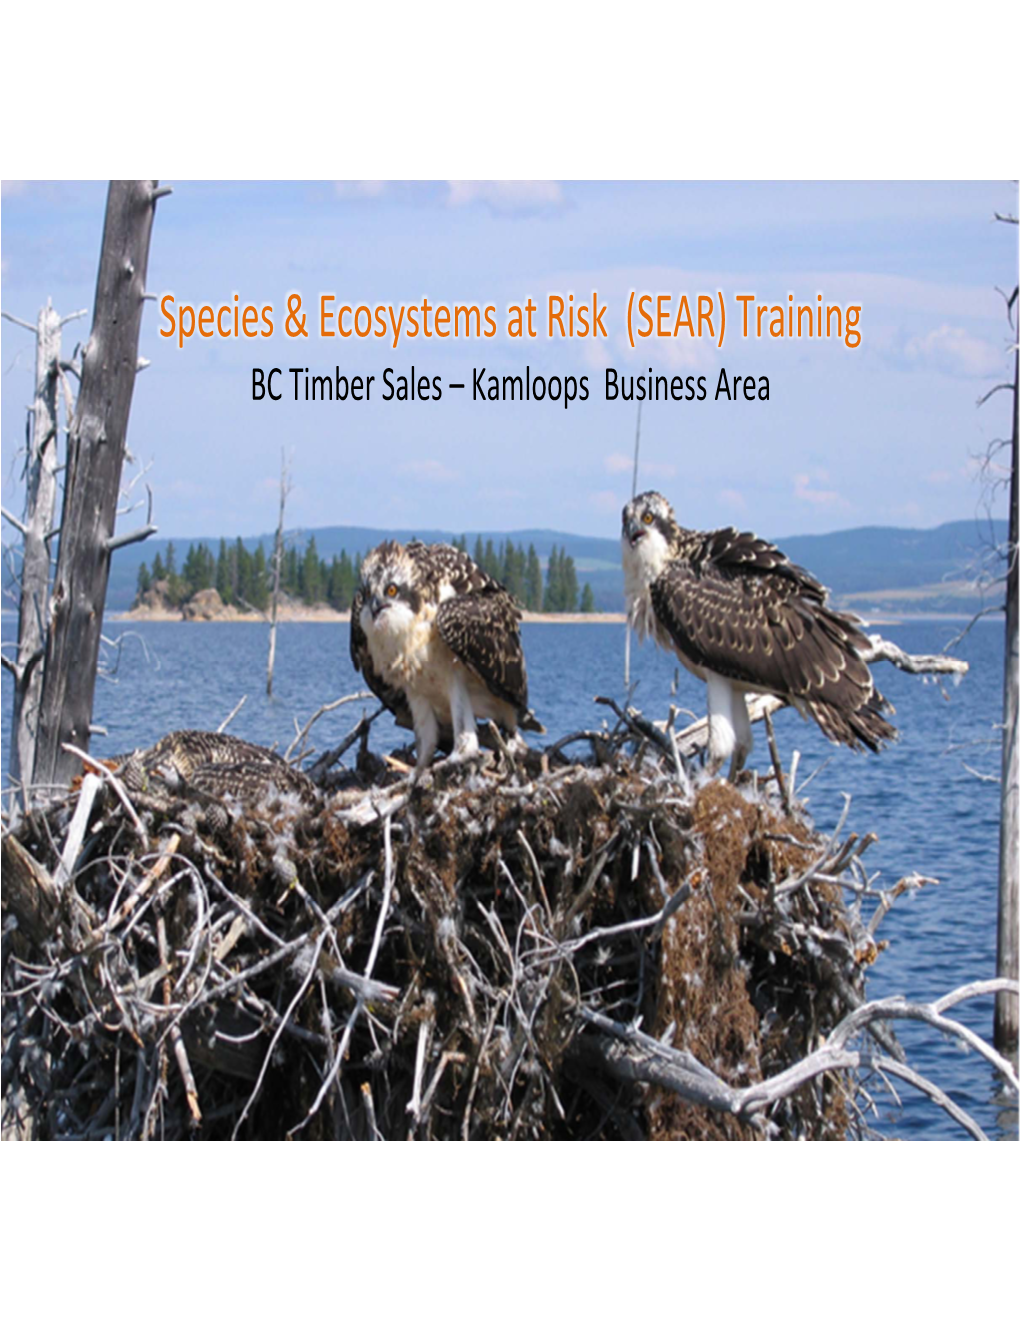 Species & Ecosystems at Risk (SEAR) Training